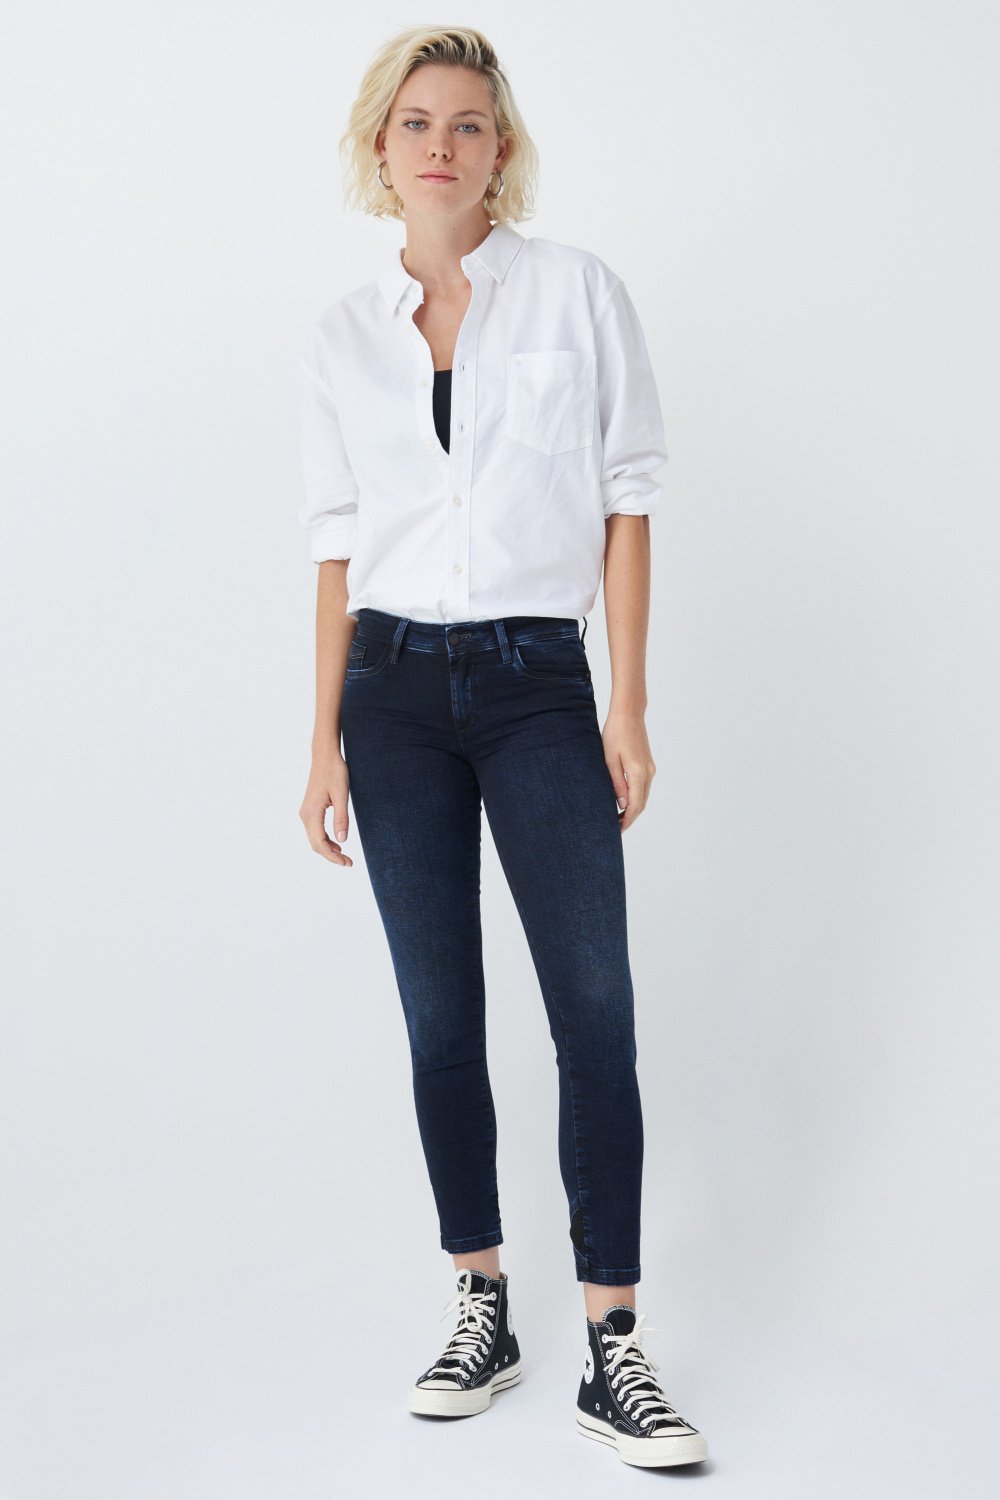 Push Up Wonder cropped jeans with transparencies - Salsa